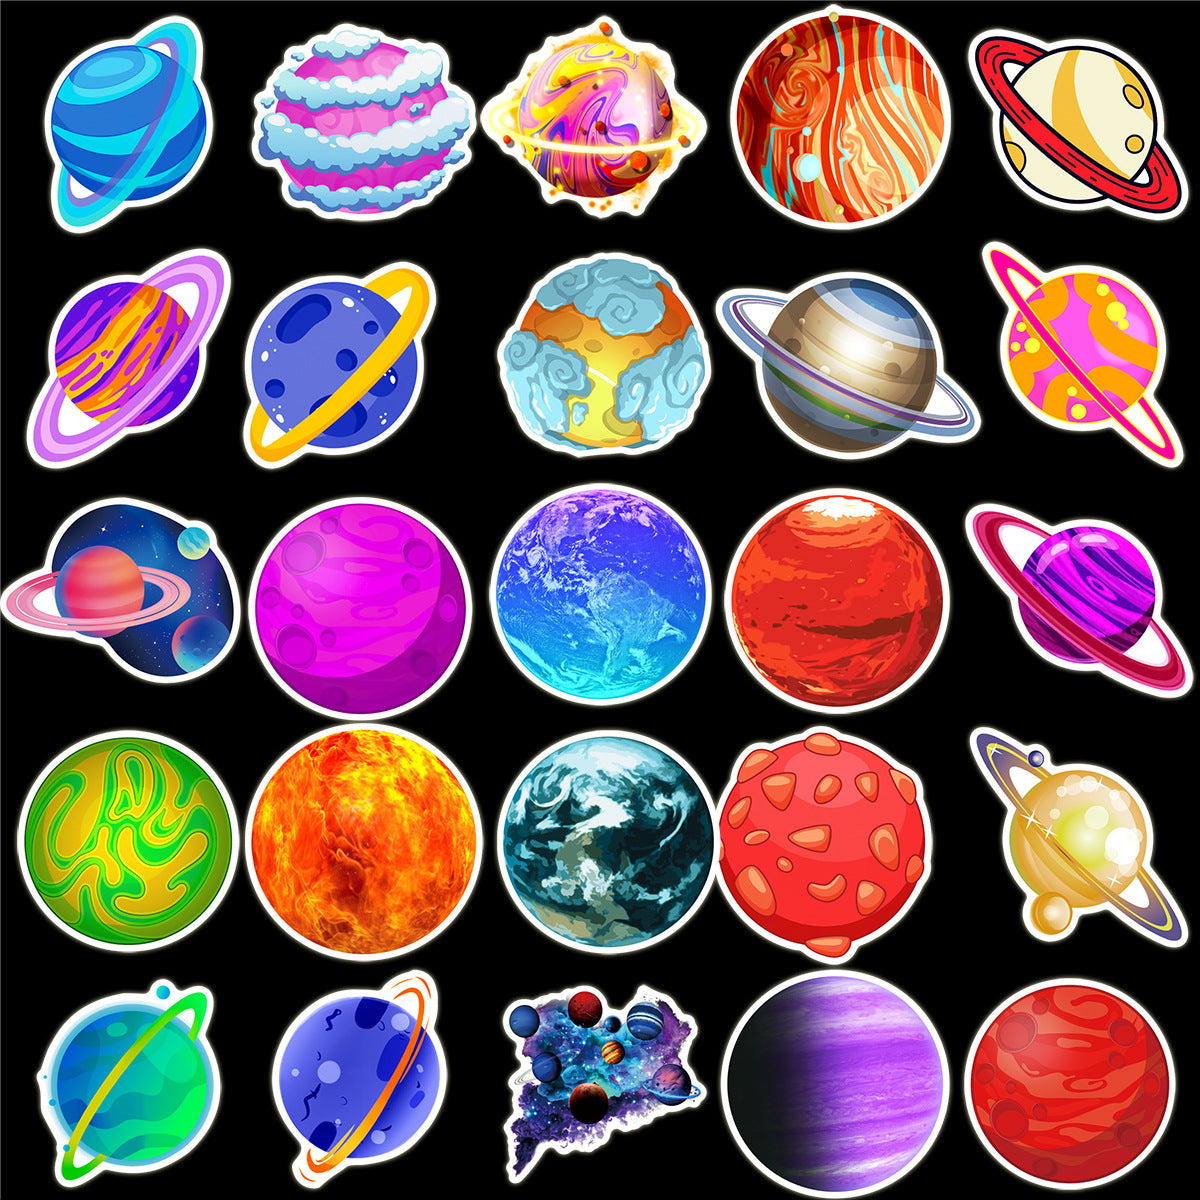 50 Cosmic Planets Galaxies Doodles Computer Luggage Stickers